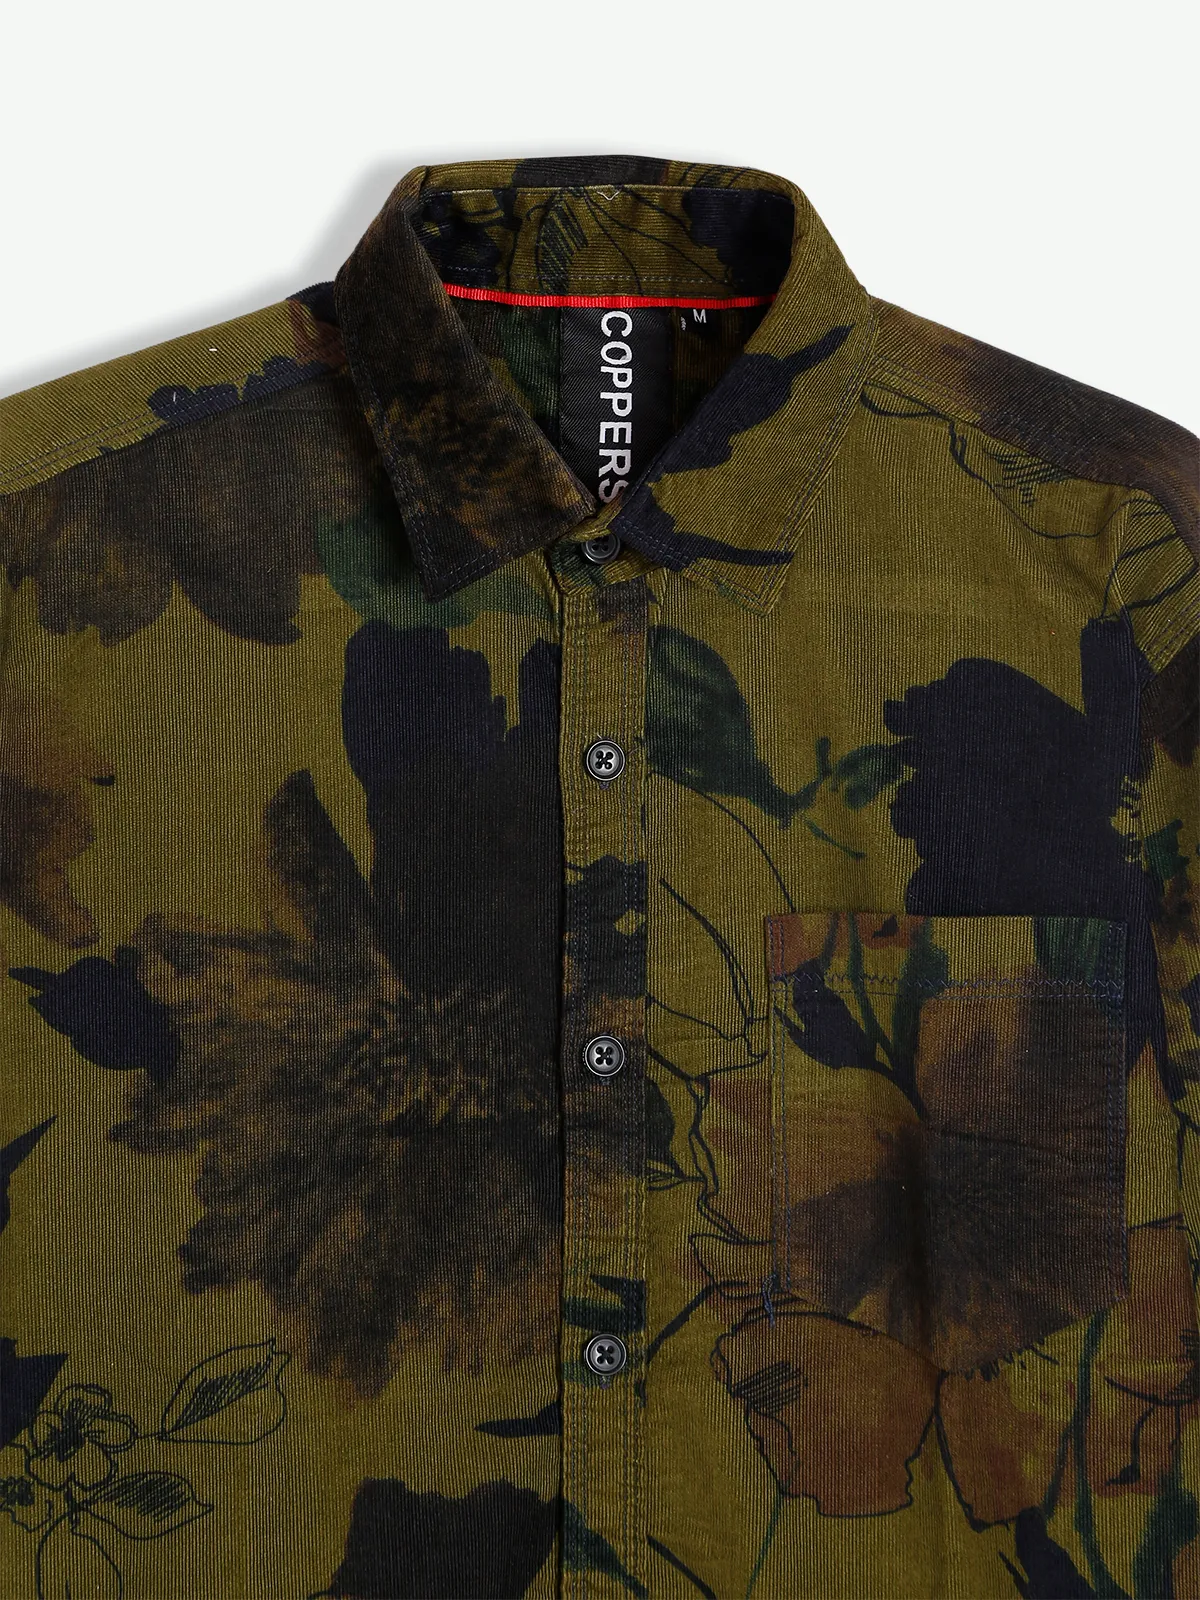 Copperstone military green printed shirt